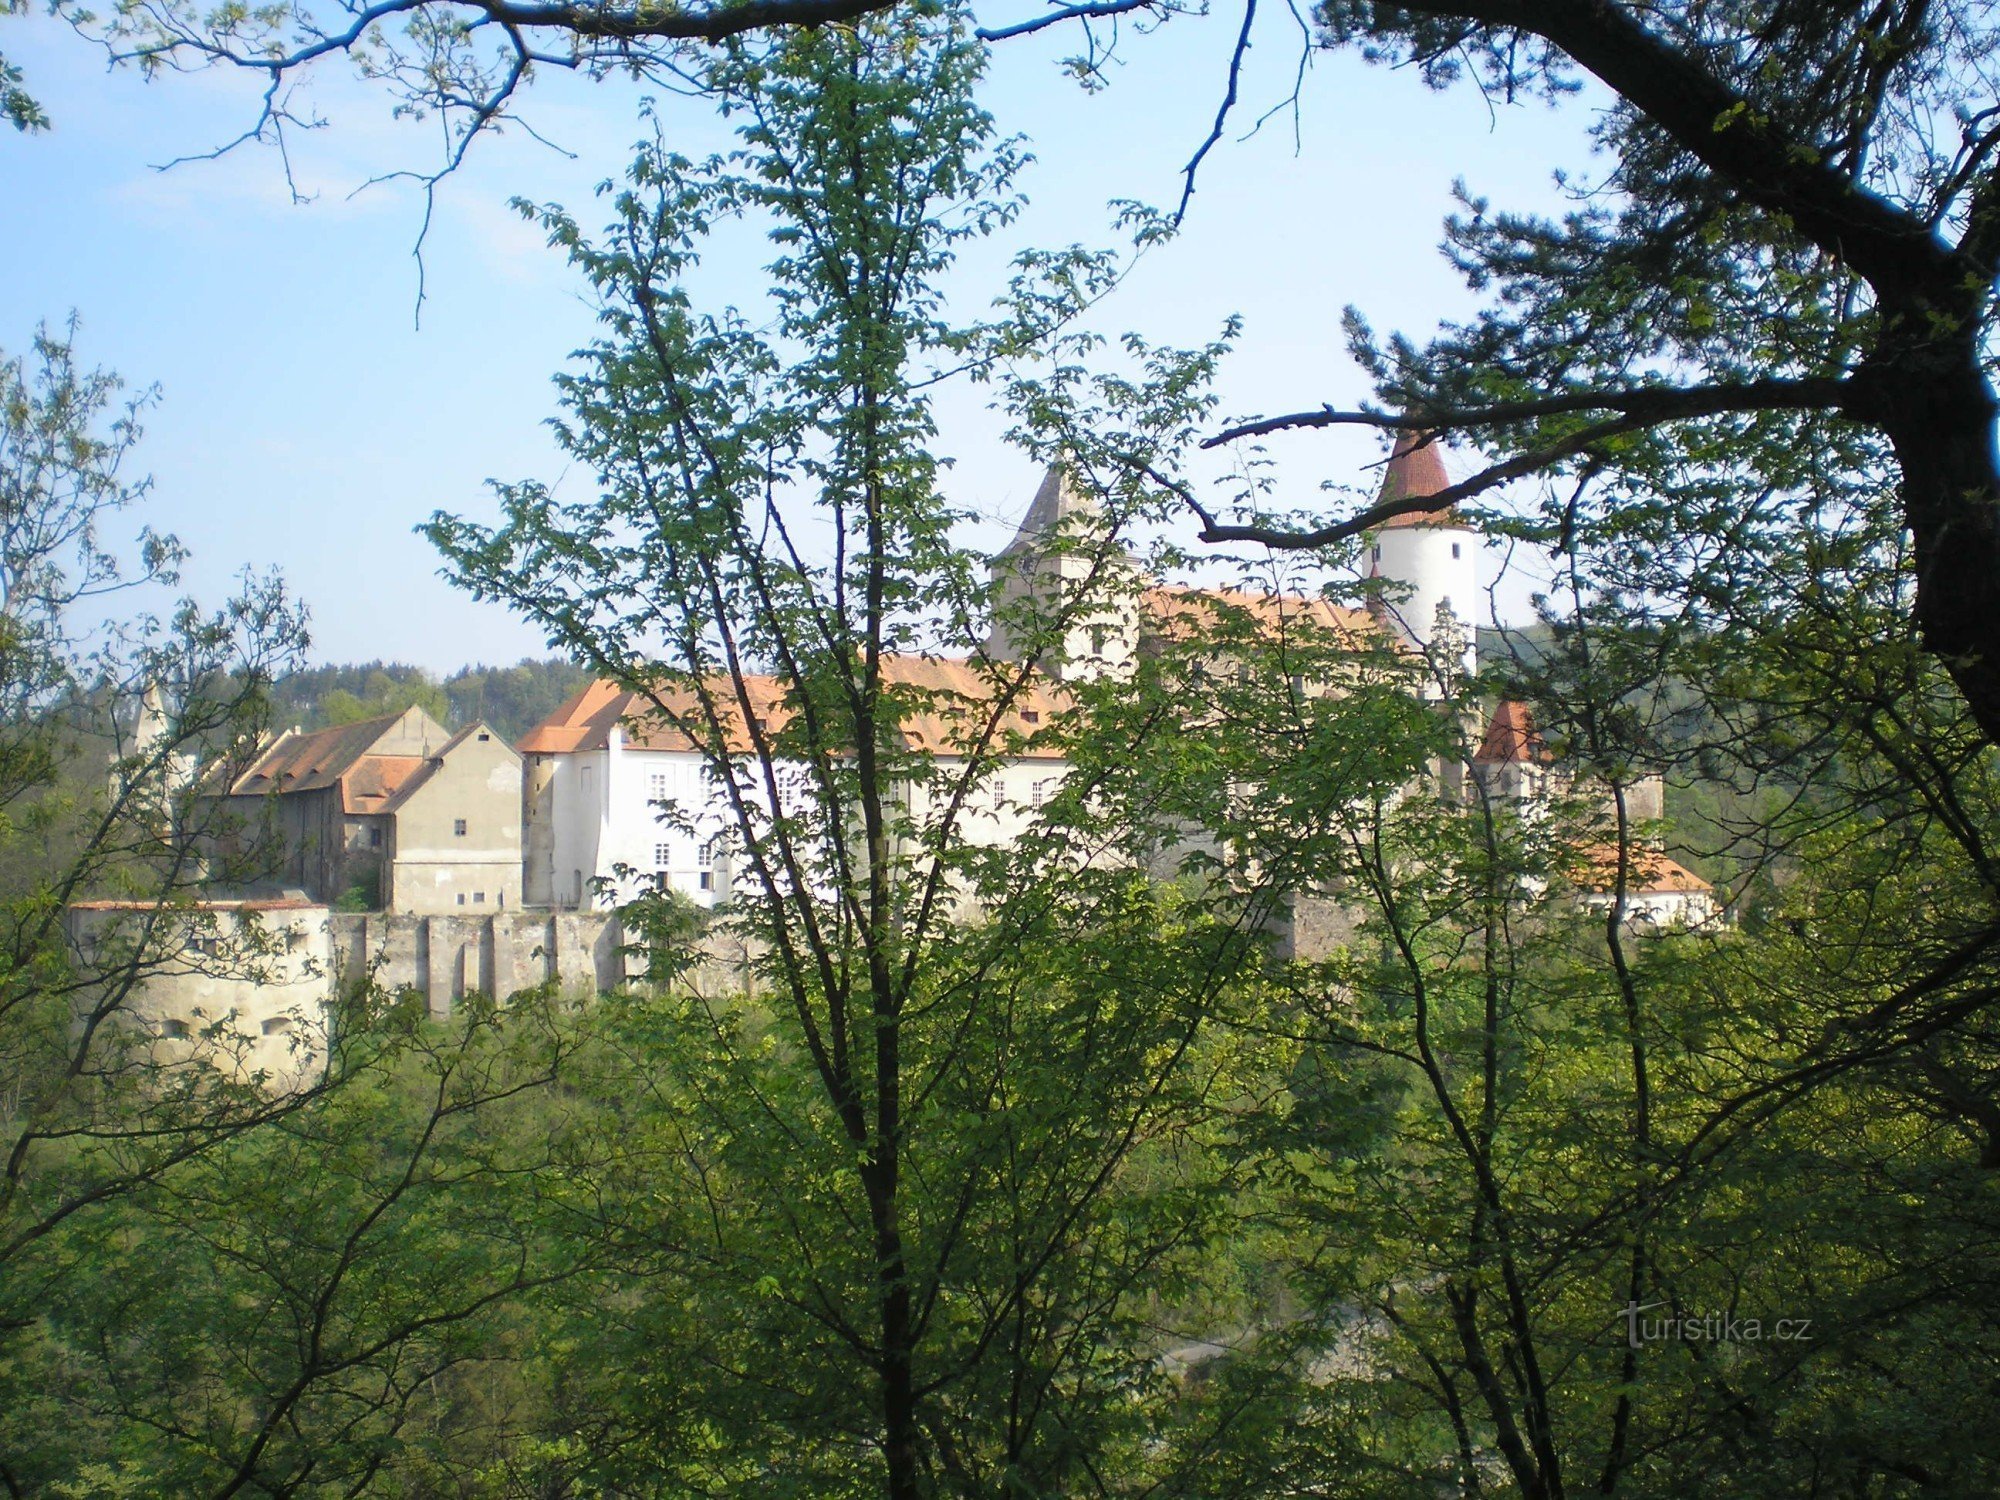 Views of the castle from the road